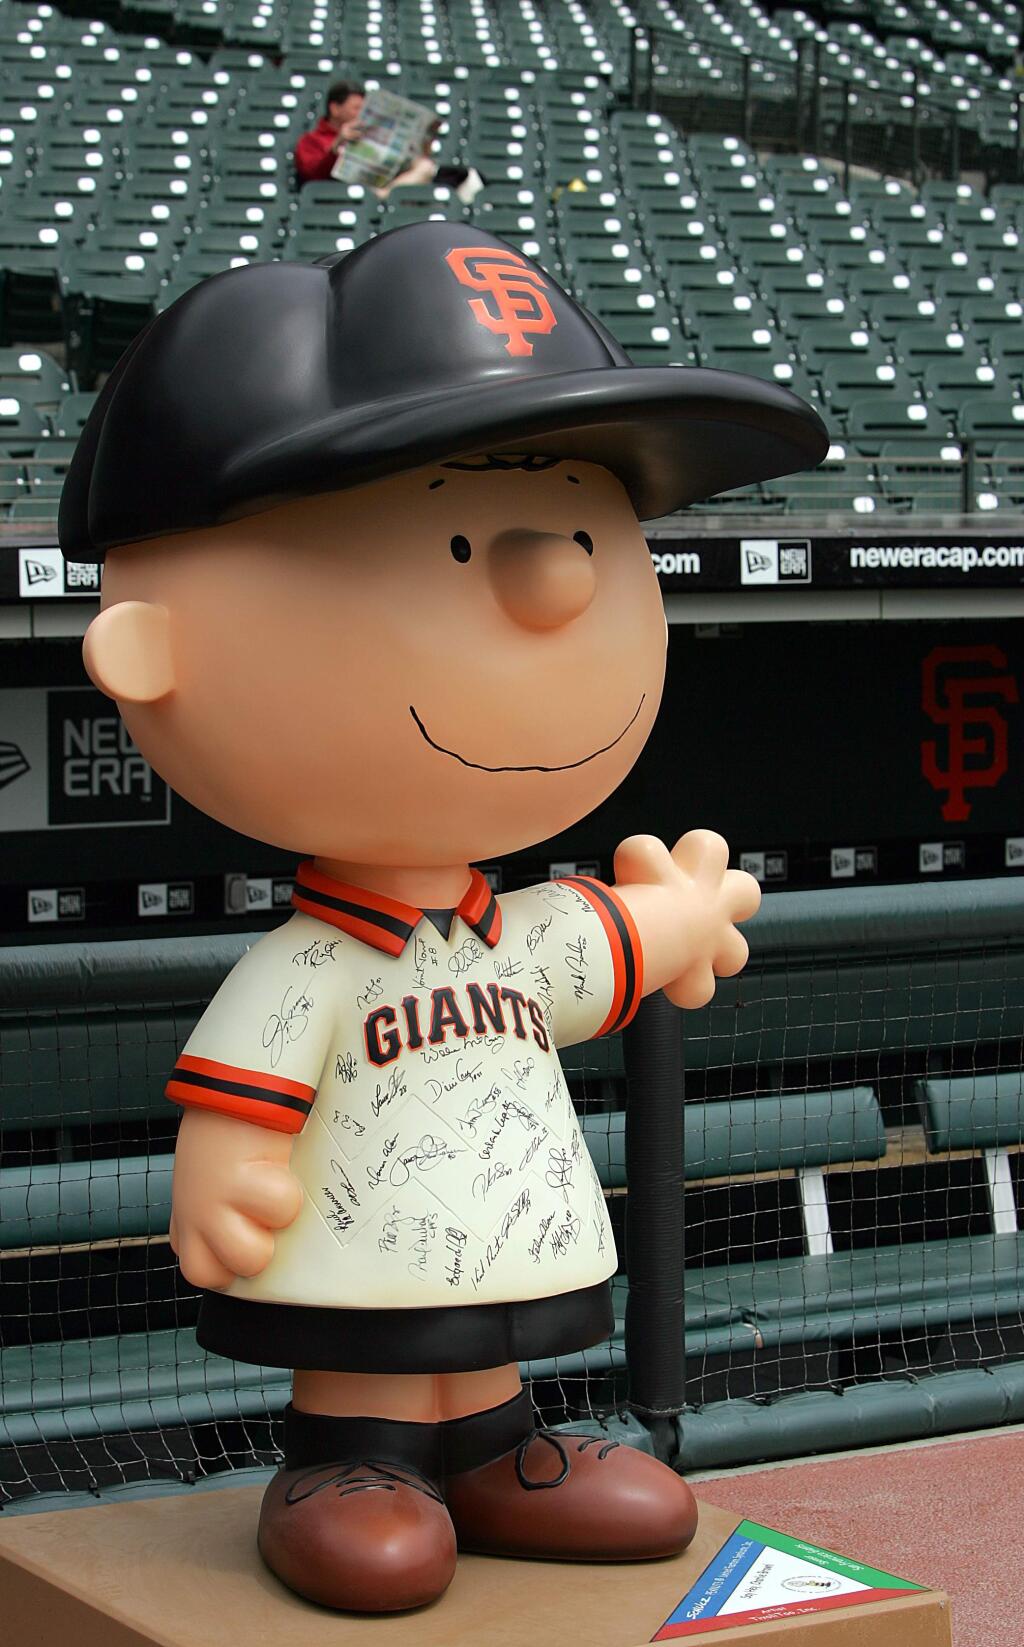 A Charlie Brown sculpture is seen in a San Francisco Giants uniform outside the Giants' dugout prior to the game with the San Diego Padres Saturday, May 28, 2005, in San Francisco. (AP Photo/Ben Margot)